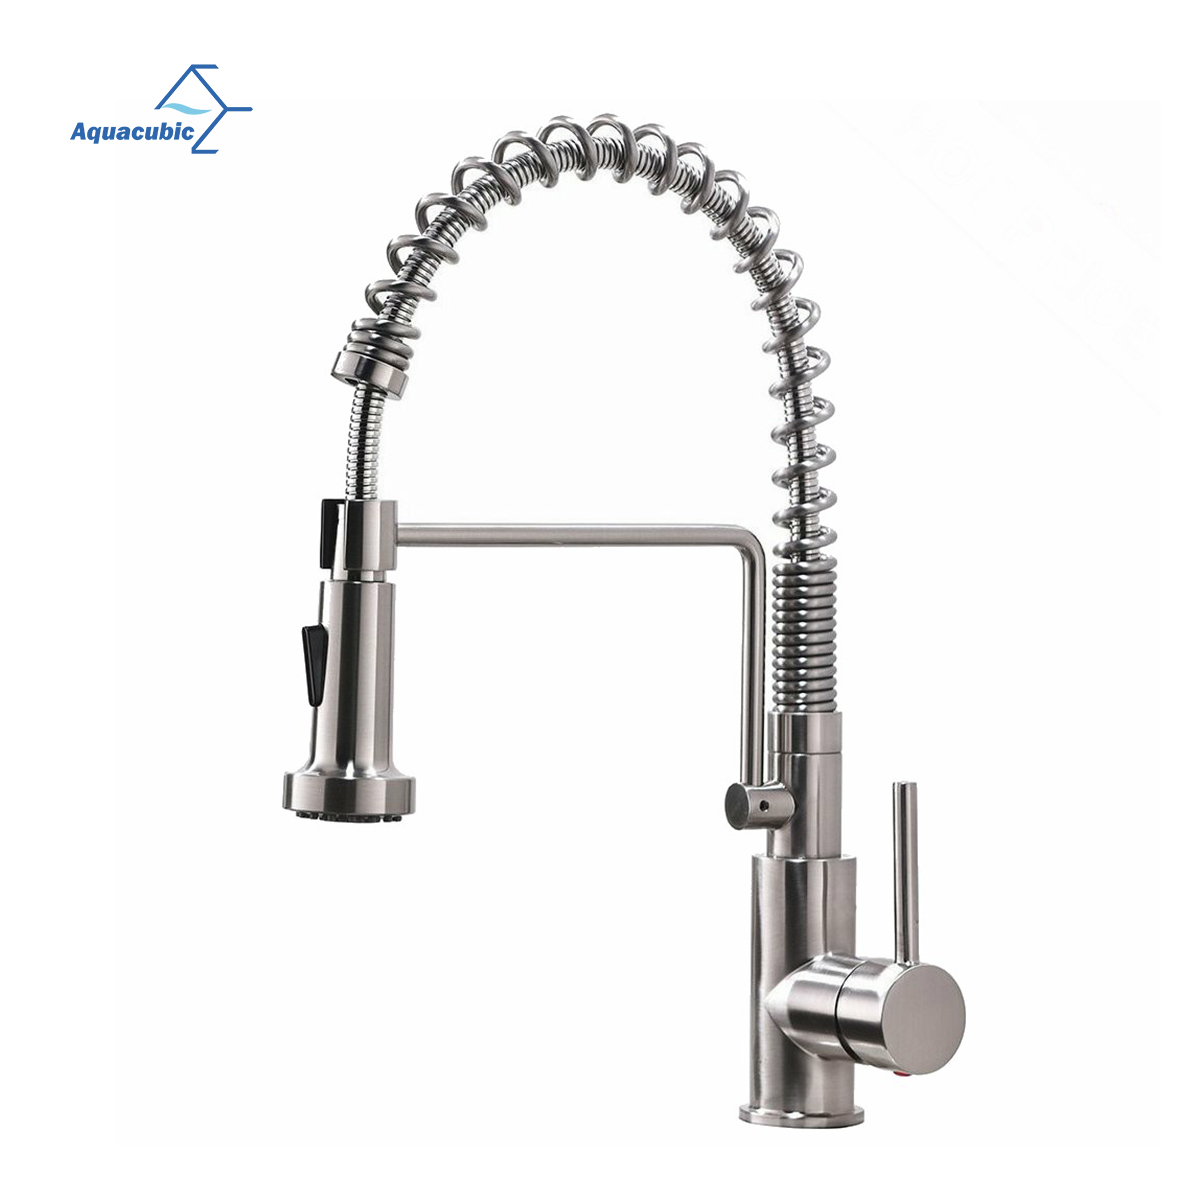 Aquacubic cUPC Water Saving Excellent Washbasin Pull Out Kitchen Faucet